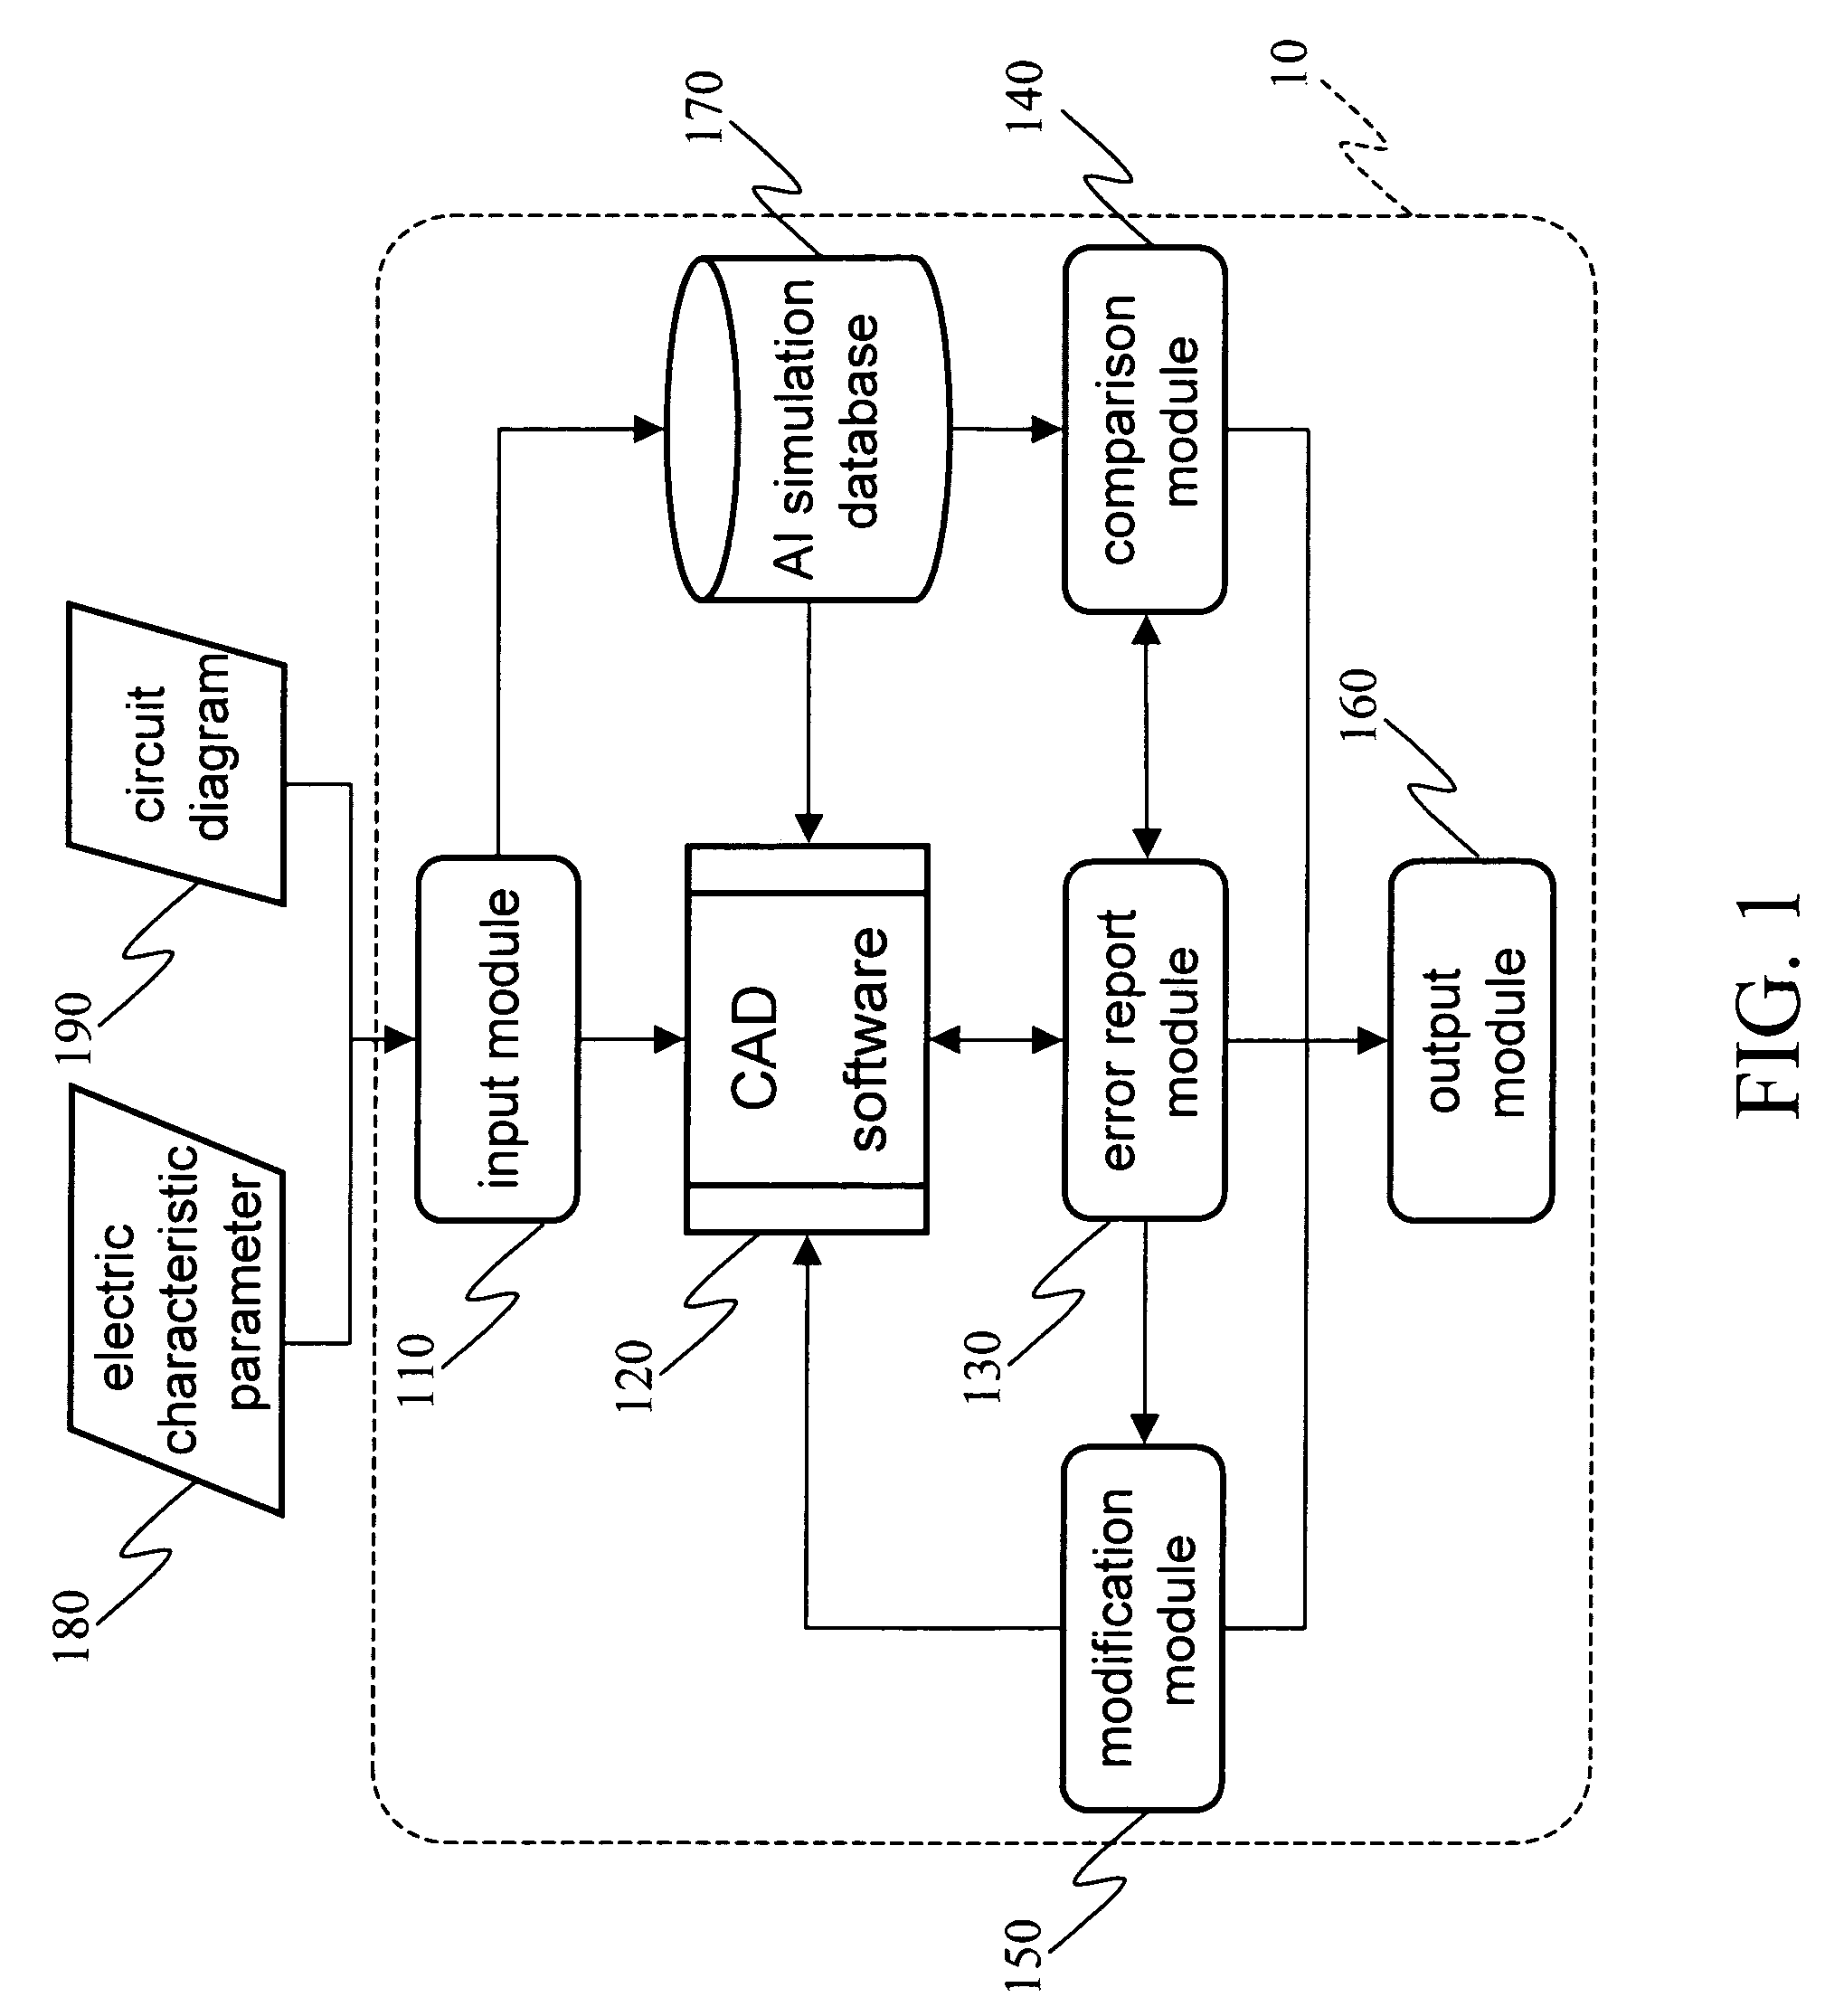 Database-aided circuit design system and method therefor